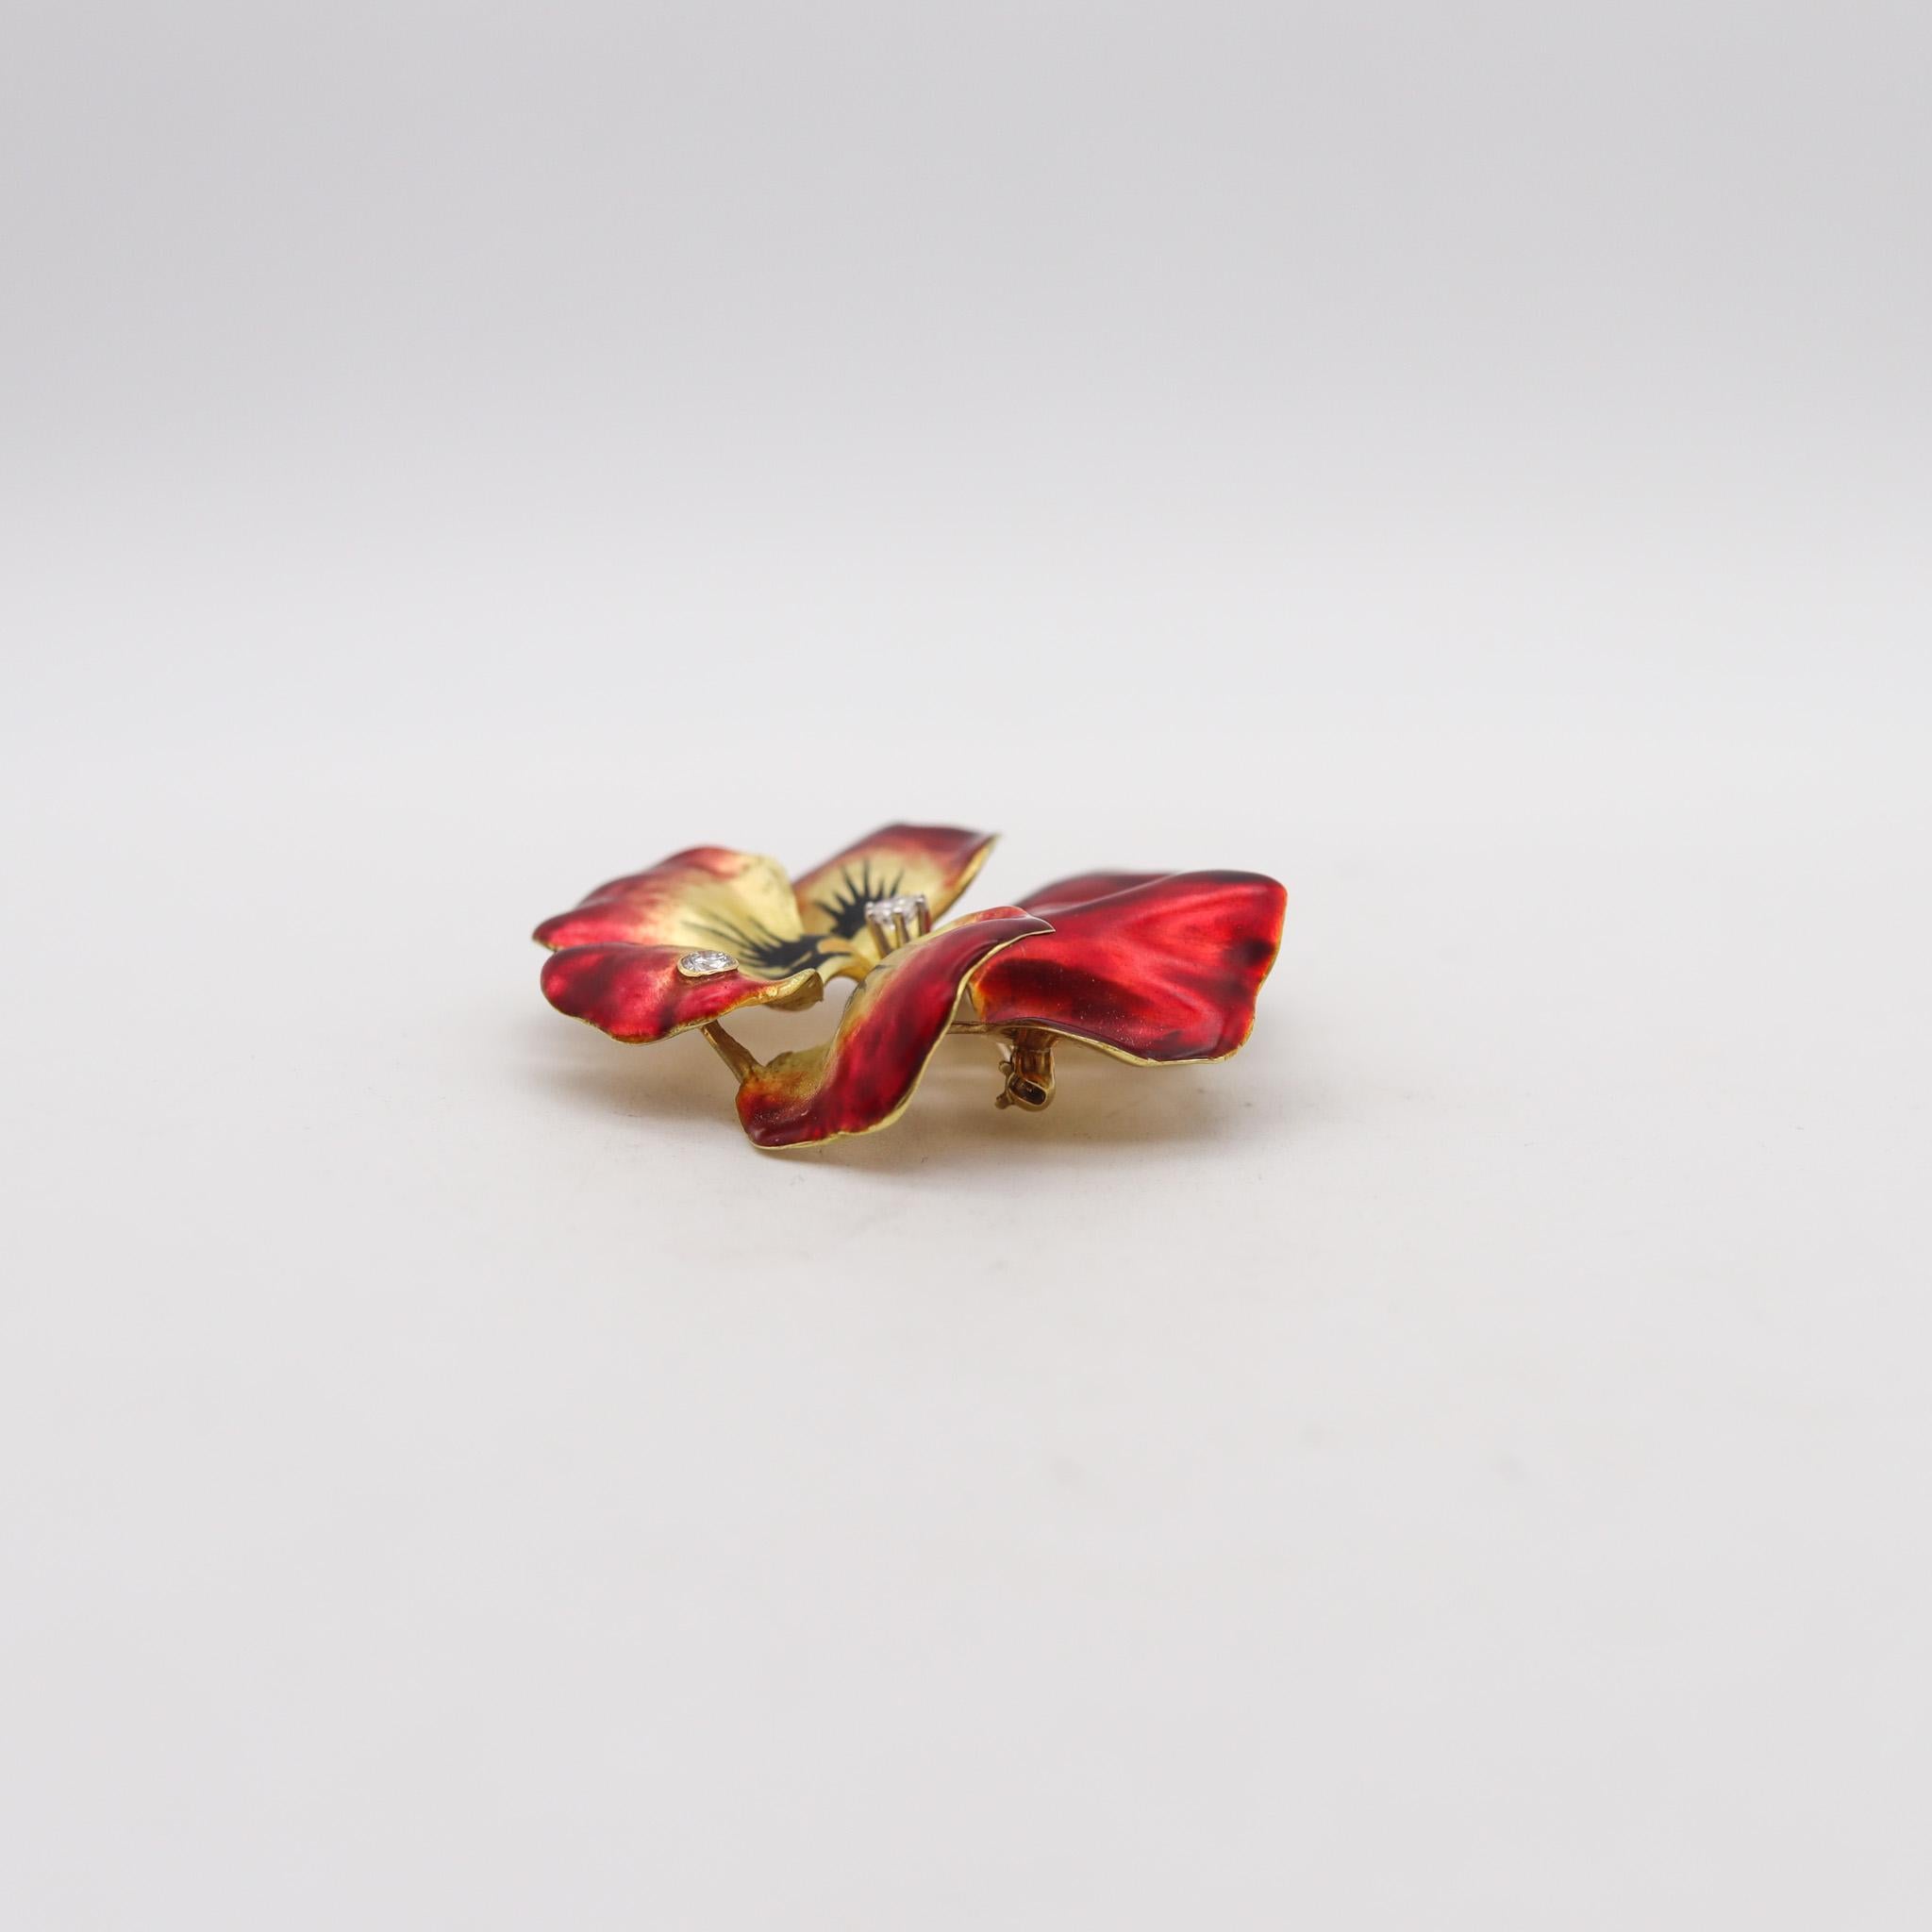 Art Nouveau 1910 Red Enamel Orchid Brooch In 18Kt Yellow Gold With VS Diamonds For Sale 1